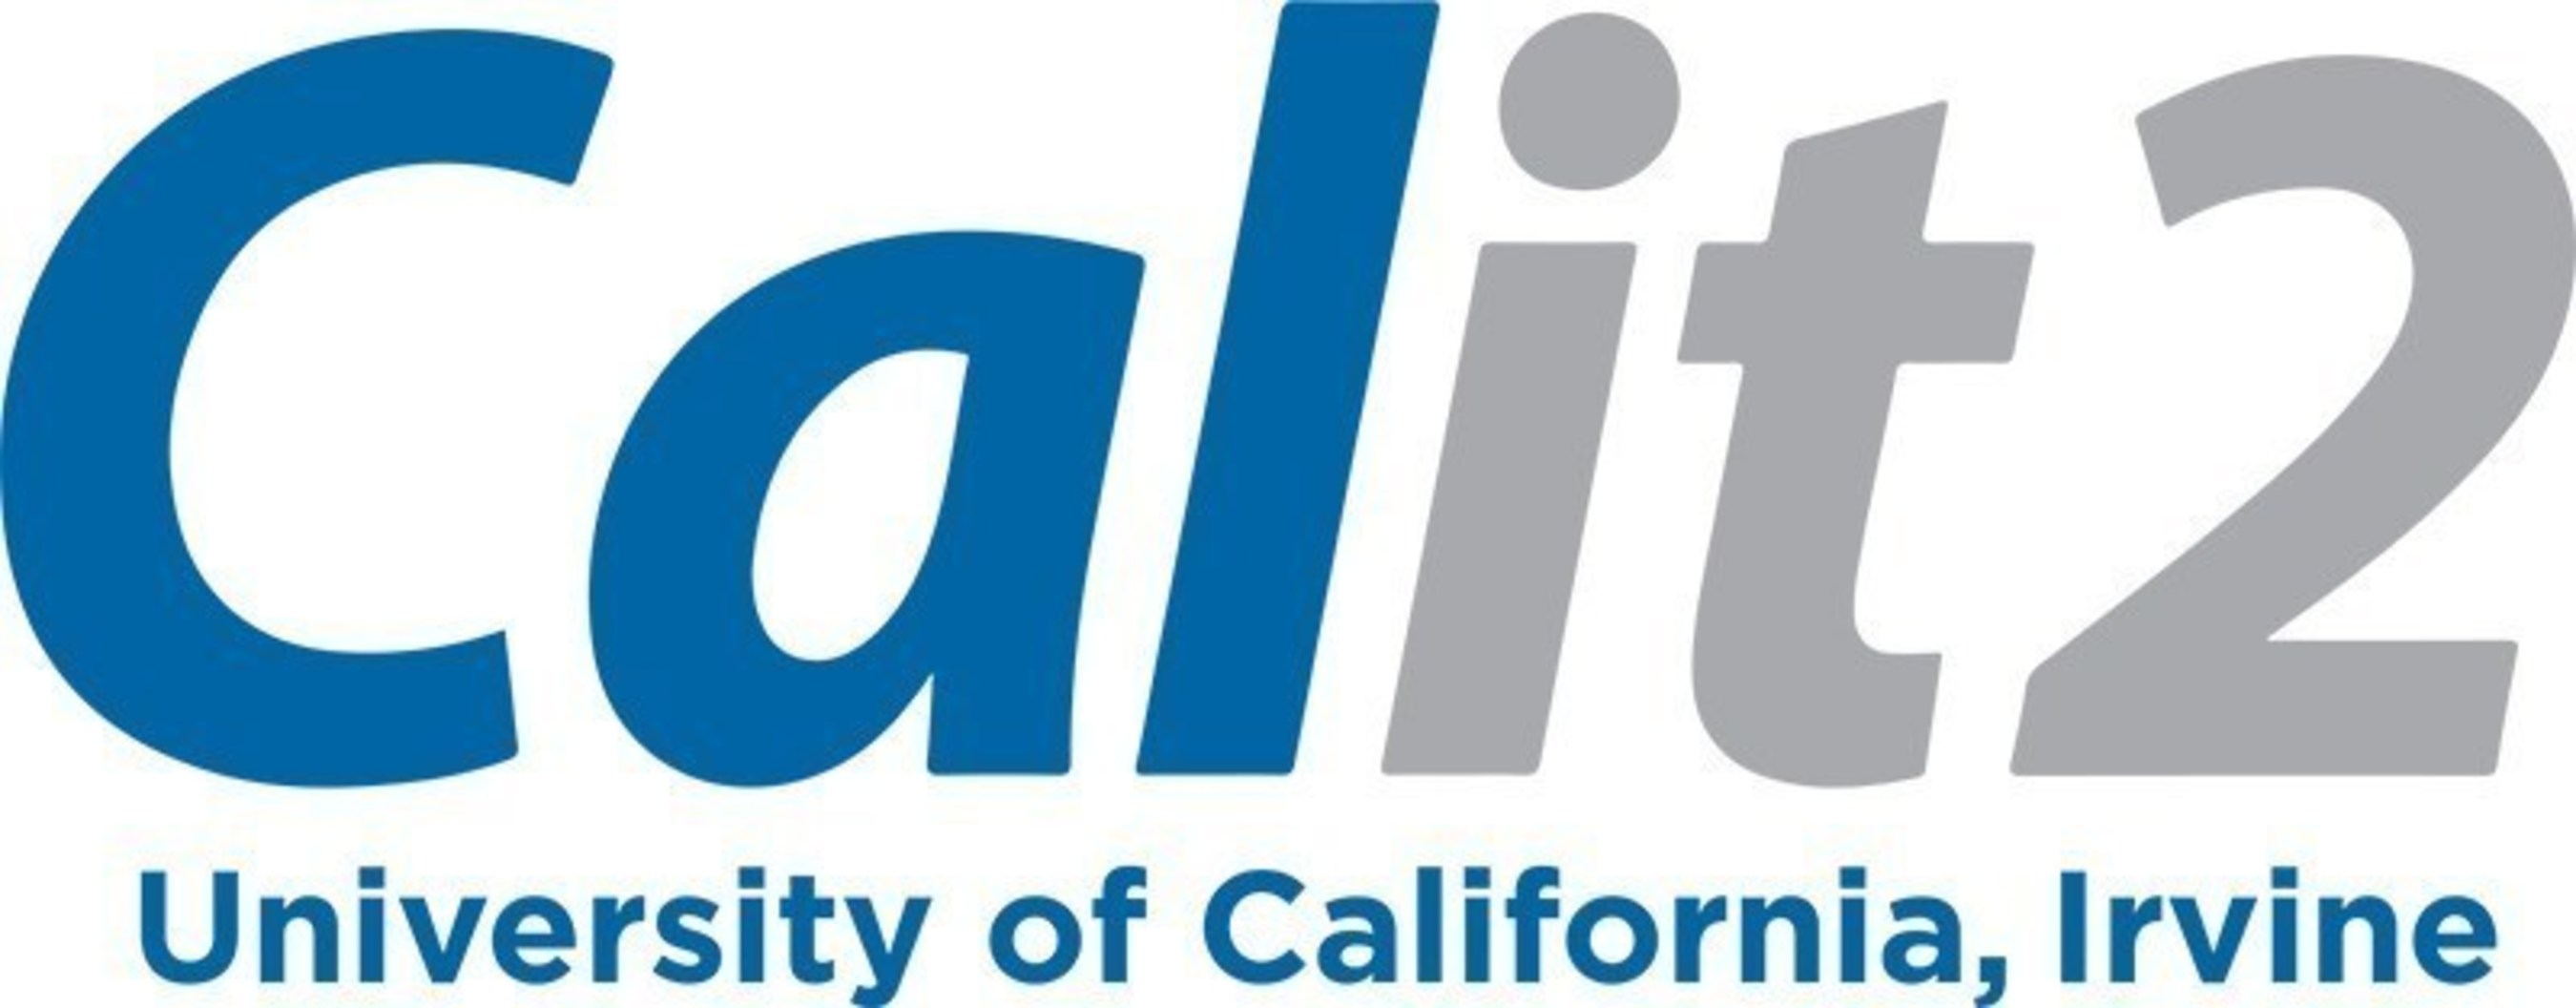 Microsemi Corporation and the University of California, Irvine today announced the upcoming grand opening of the Microsemi Innovation Lab within the UCI Calit2 facility on Tuesday, Nov. 3 at 3 p.m.